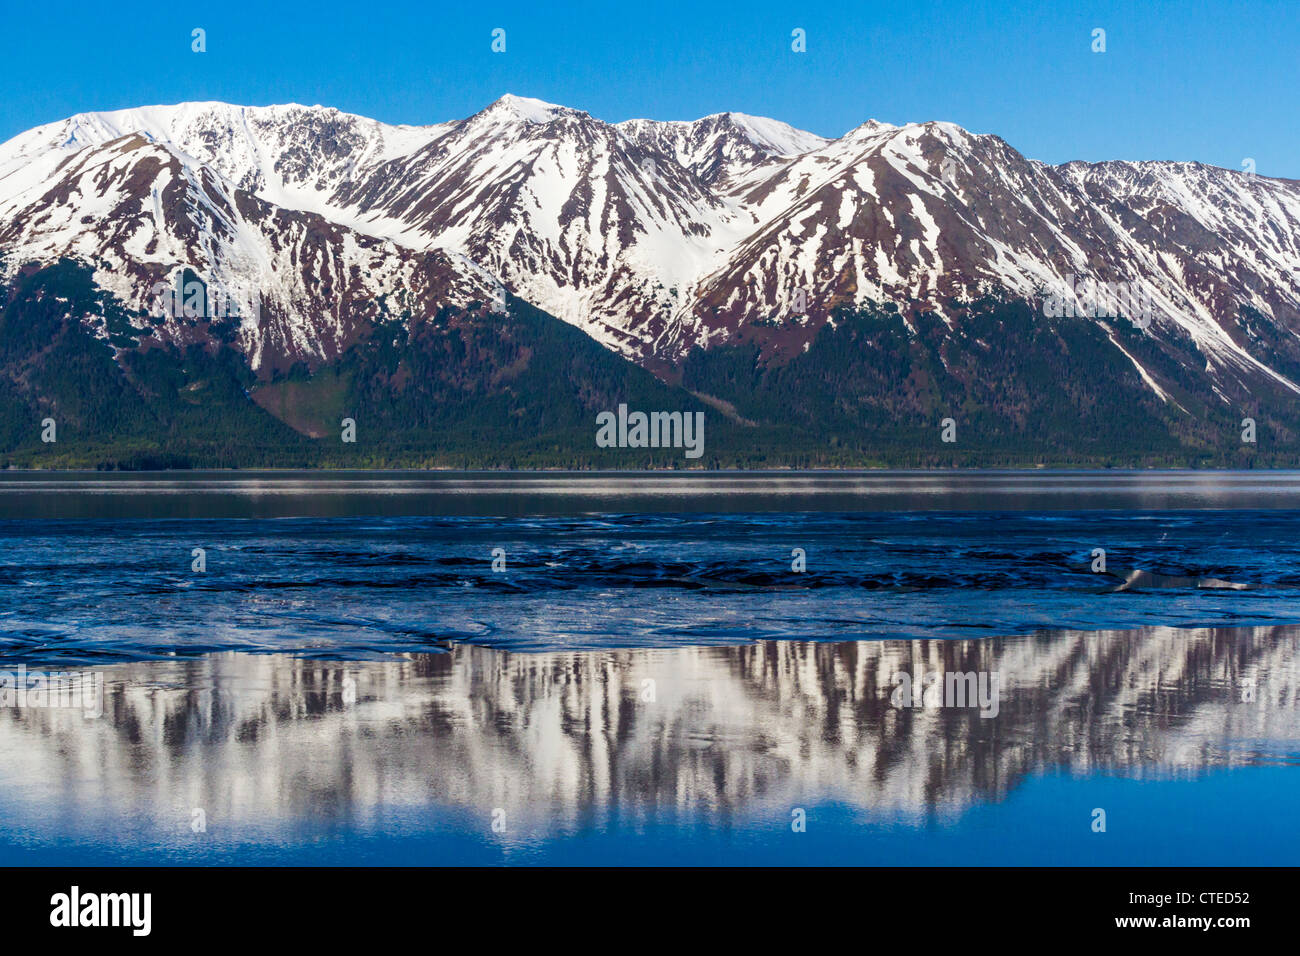 Reflections of snow-covered mountains in beautiful blue waters of 'Turnagain Arm,' an arm of 'Cook Inlet' in Alaska. Stock Photo